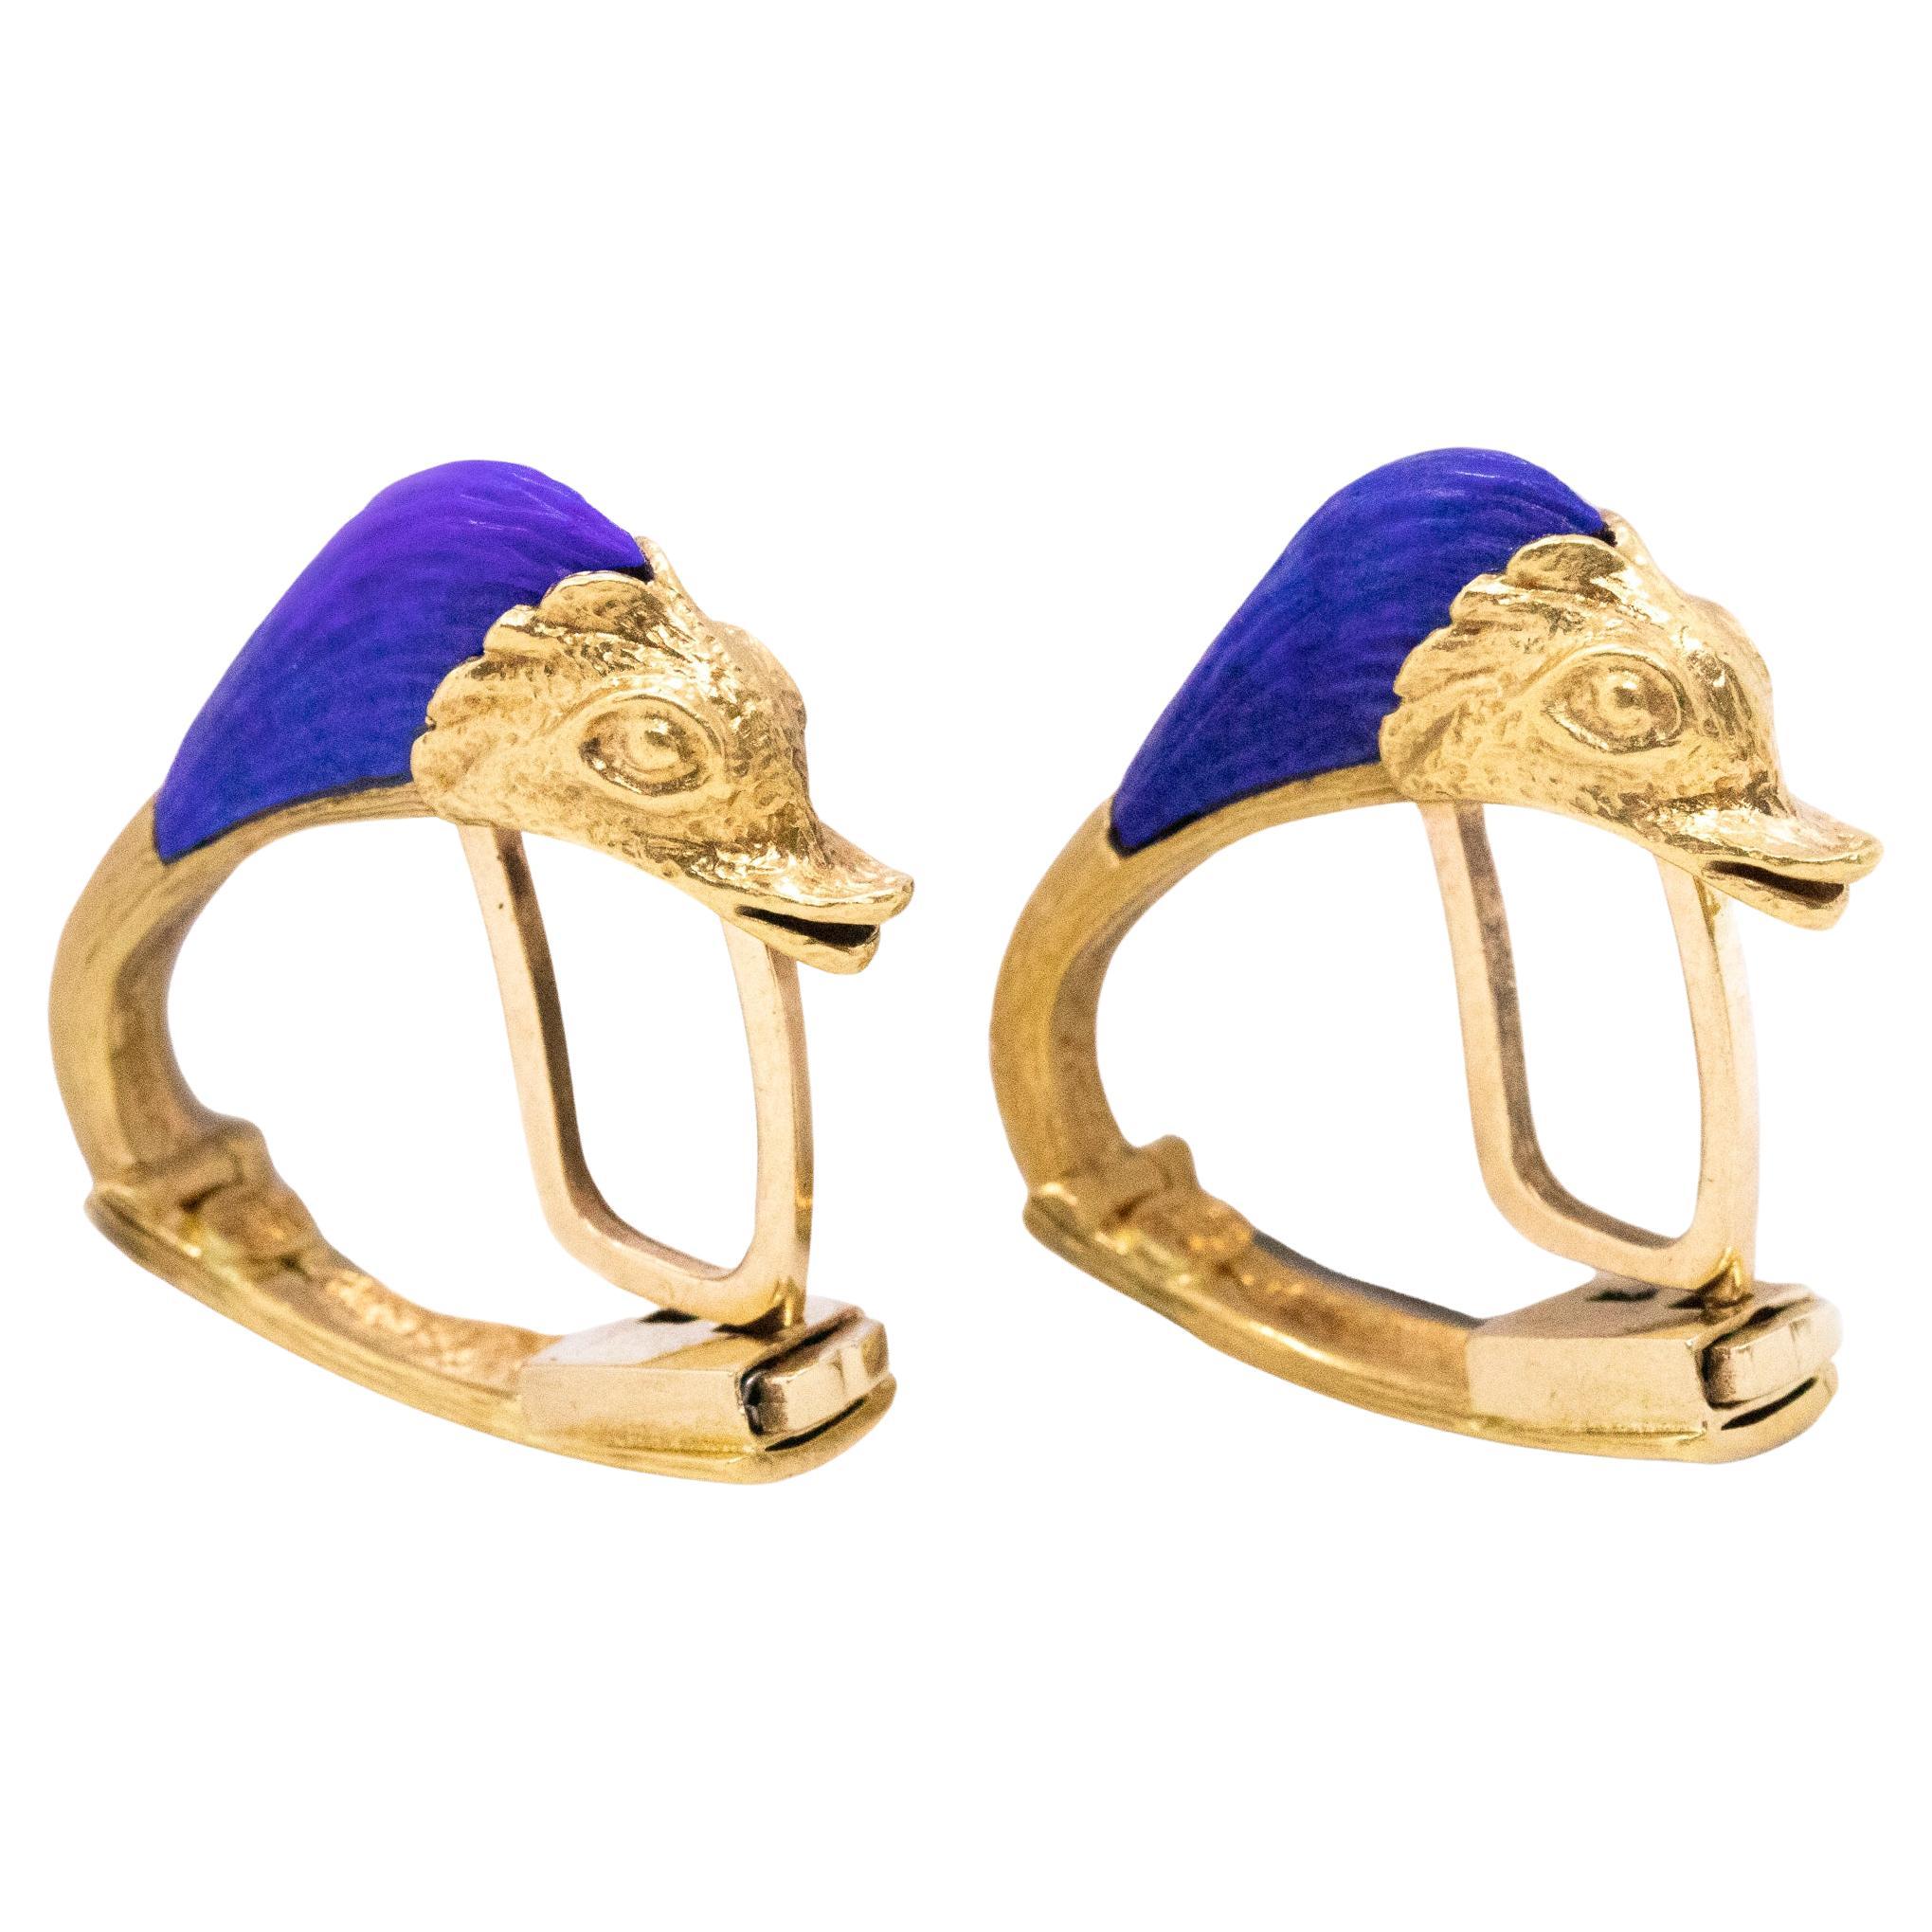 Swiss Cufflinks 1950 Mythological Zodiacal Piscis in 18Kt Gold with Lapis Lazuli For Sale